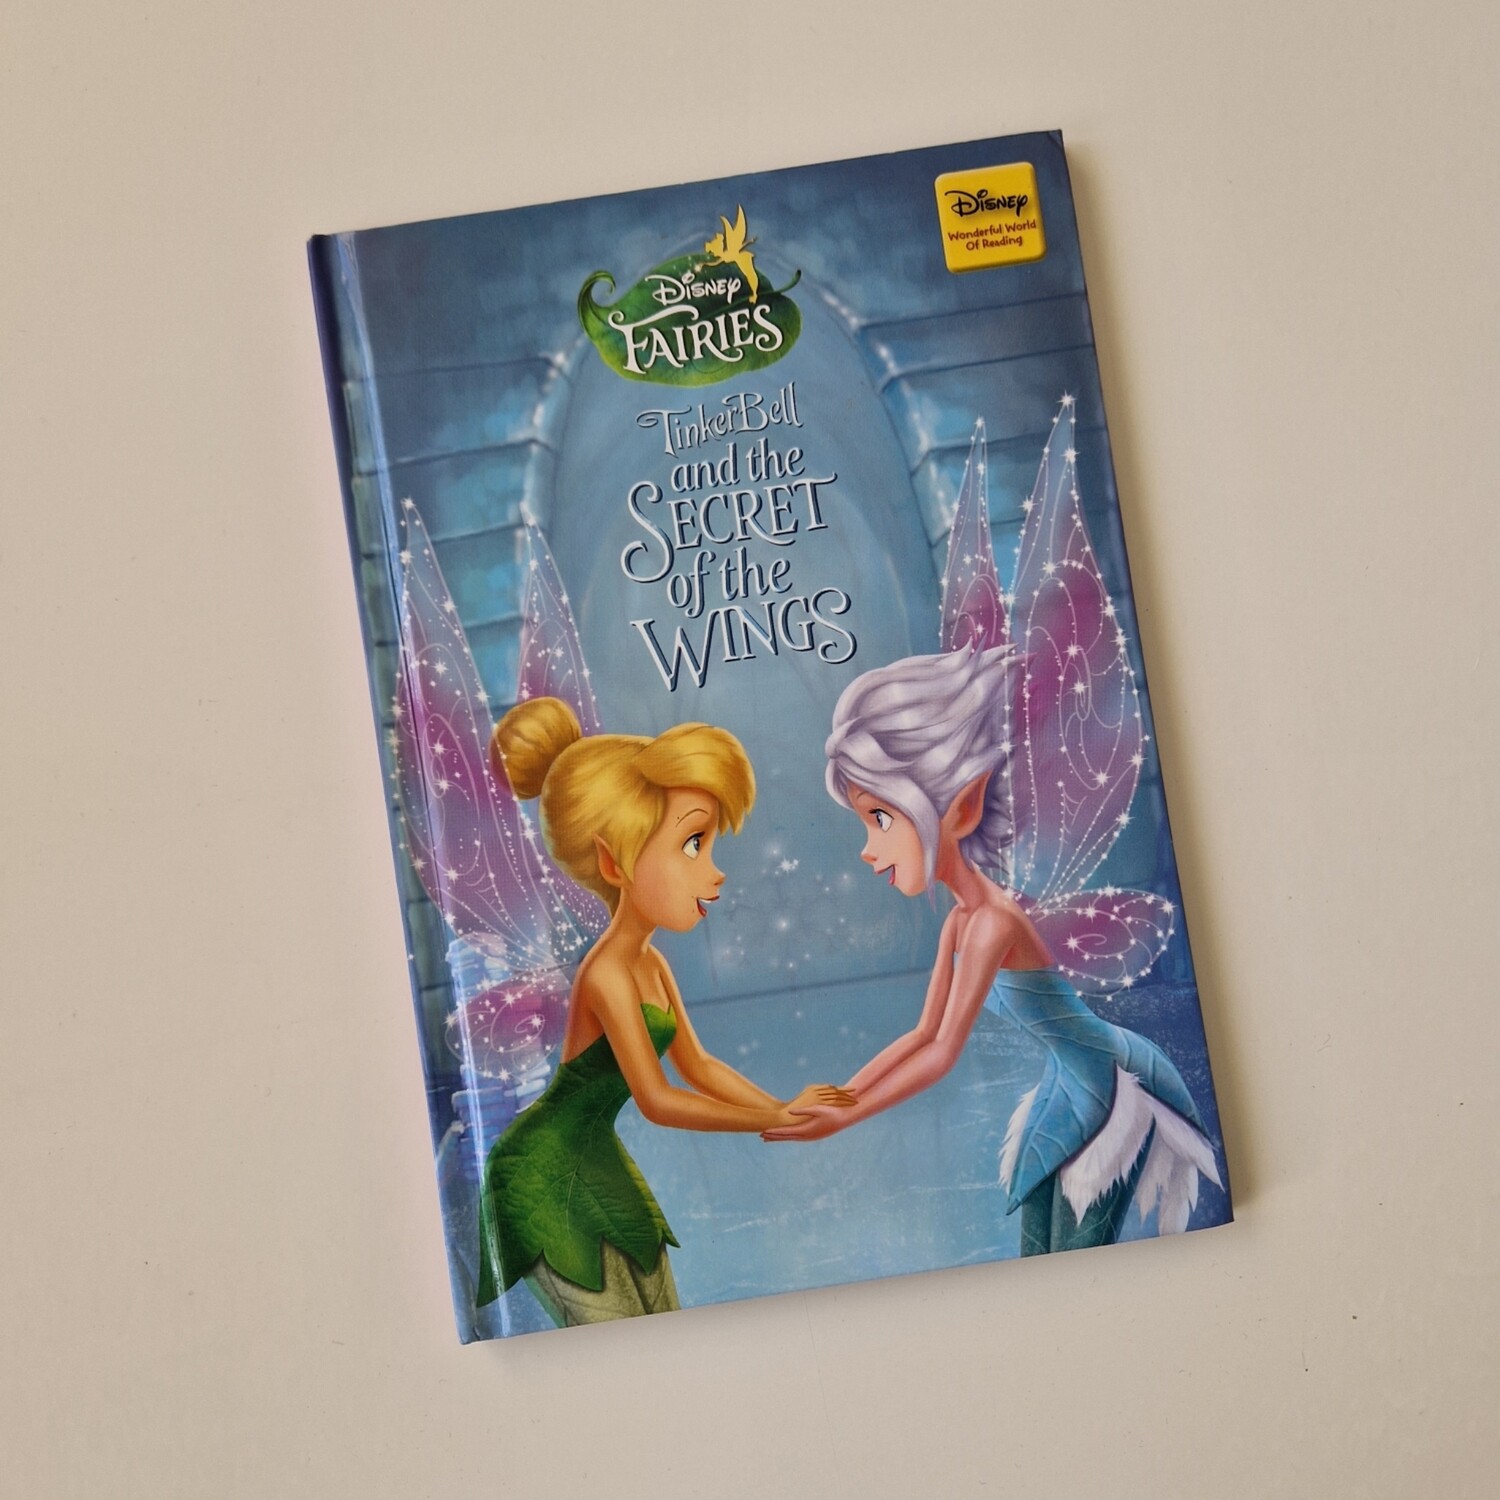 Tinkerbell and the Secret Wings Notebookn